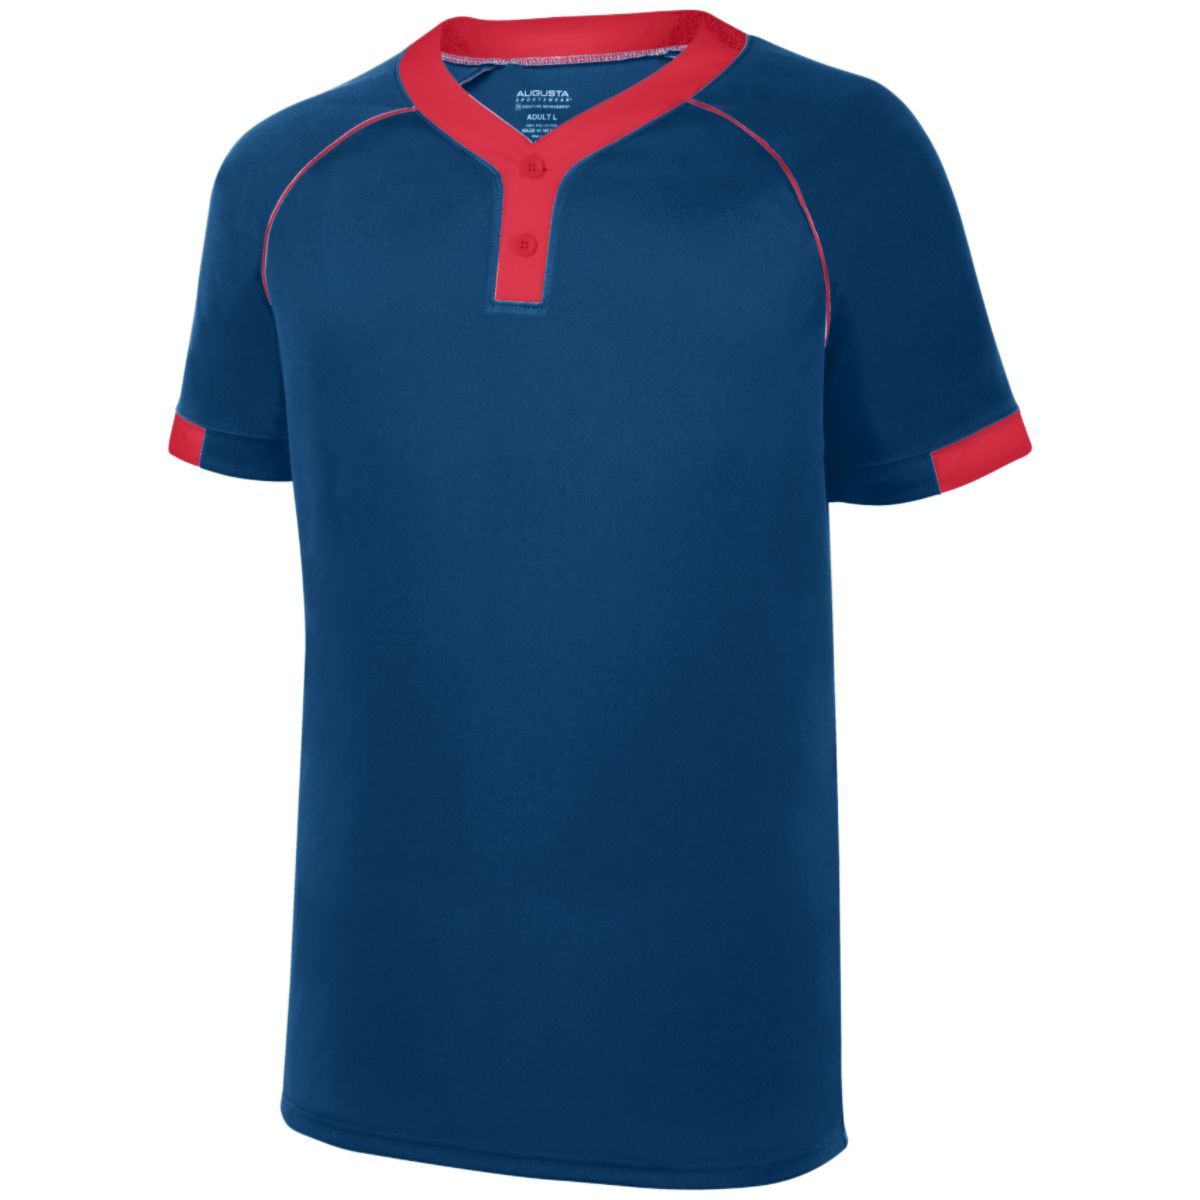 Augusta Sportswear Stanza Jersey in Navy/Red  -Part of the Adult, Adult-Jersey, Augusta-Products, Baseball, Shirts, All-Sports, All-Sports-1 product lines at KanaleyCreations.com